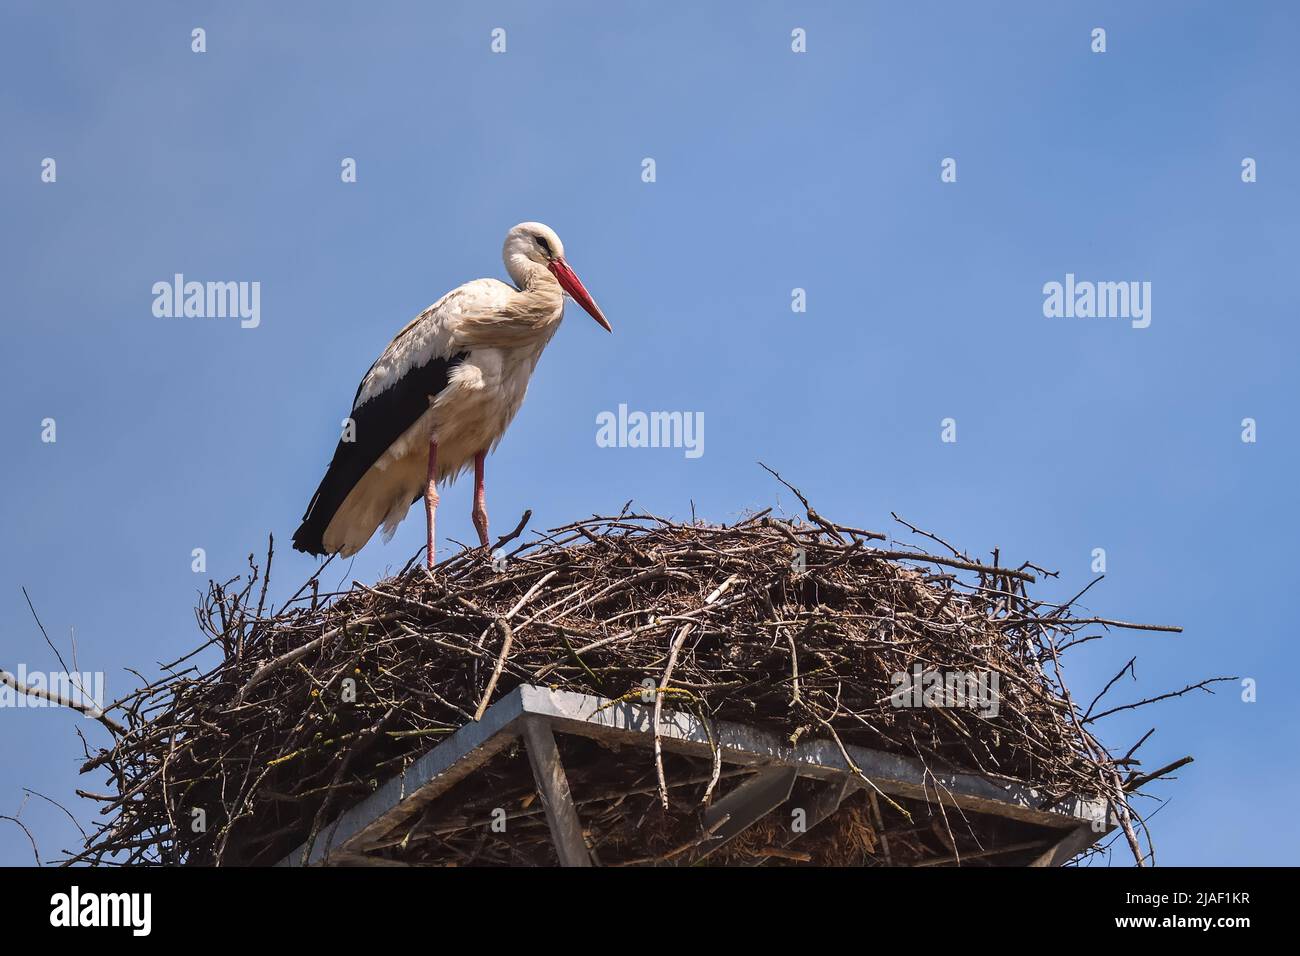 Early spring scene. Storks in a nest with a blue sky in the background. Stock Photo